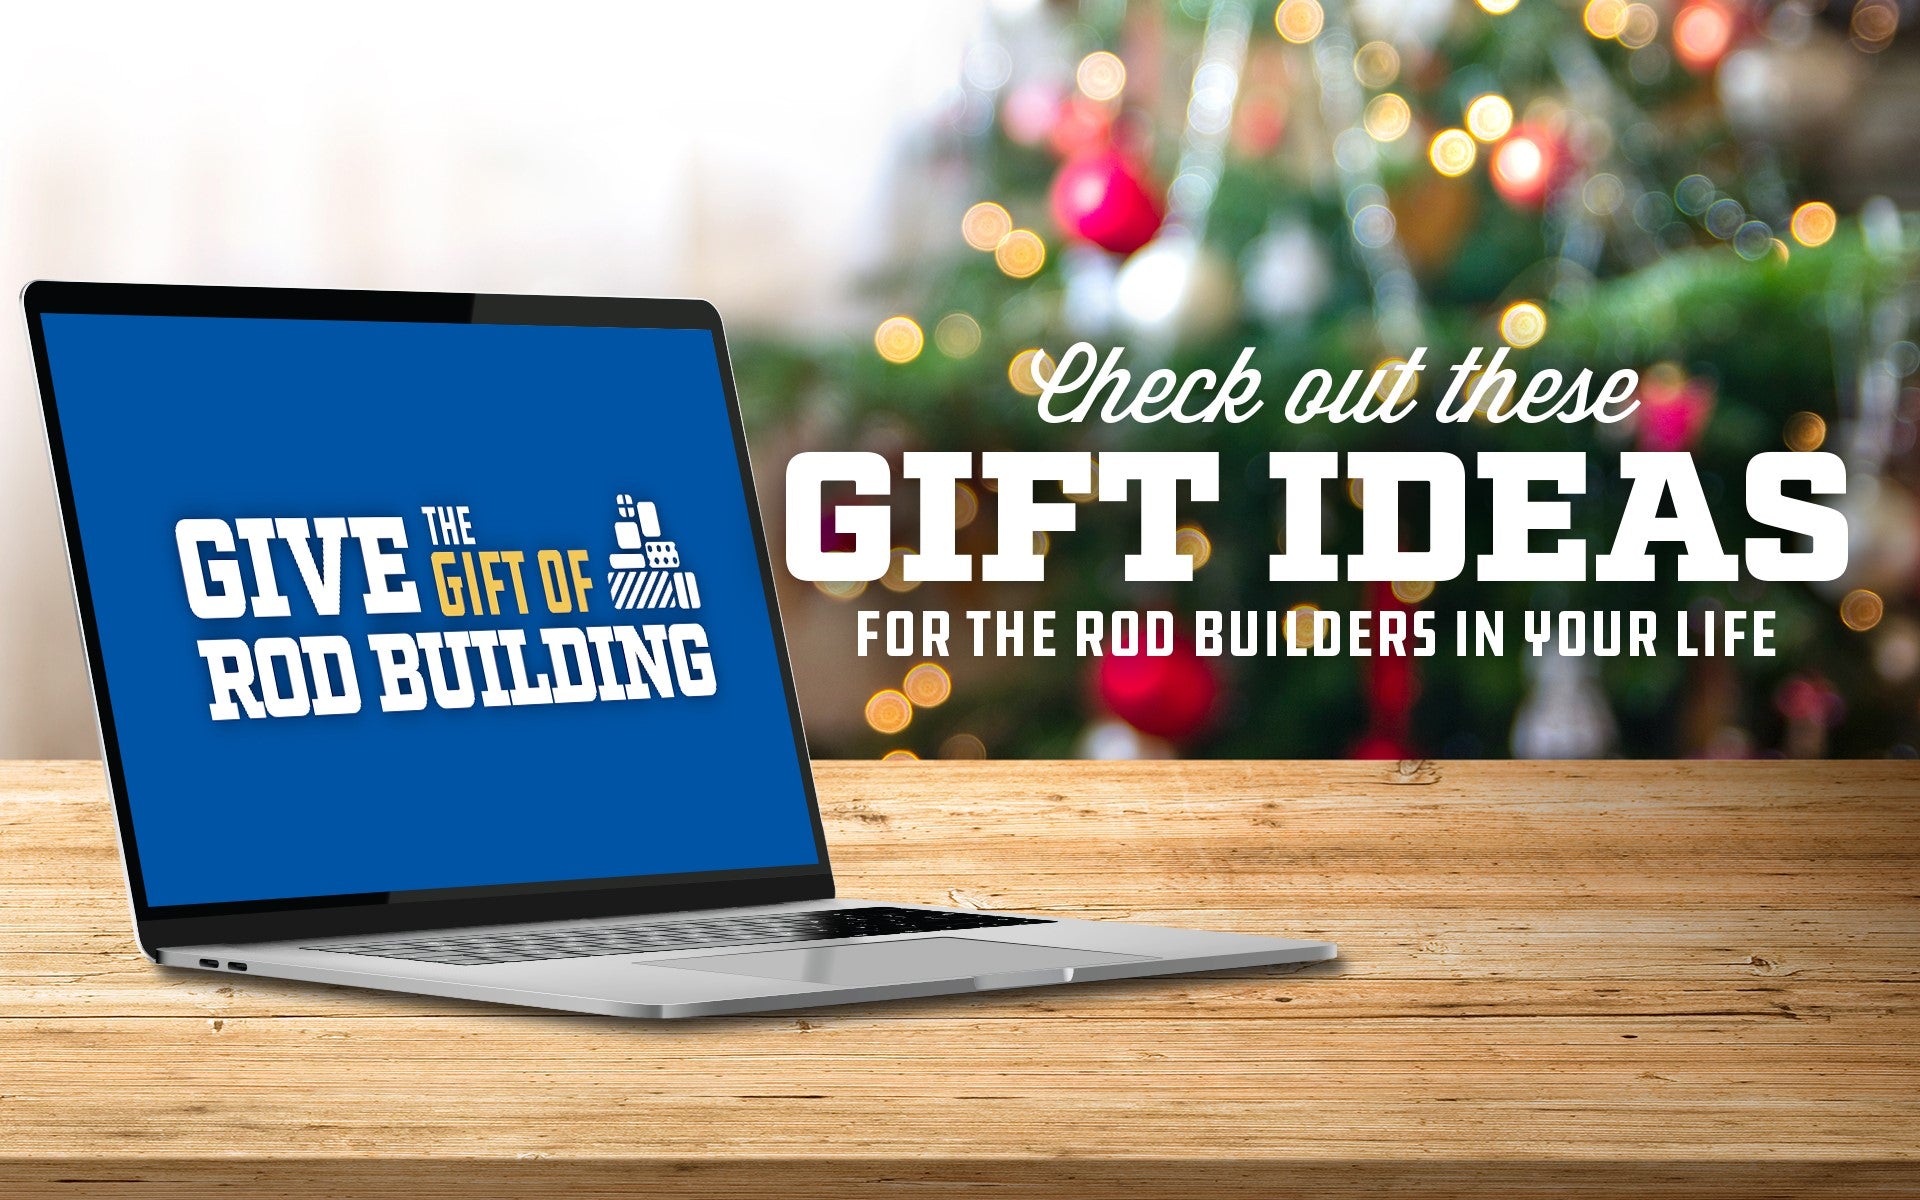 The Best Rod Building Gifts for the Holiday Season